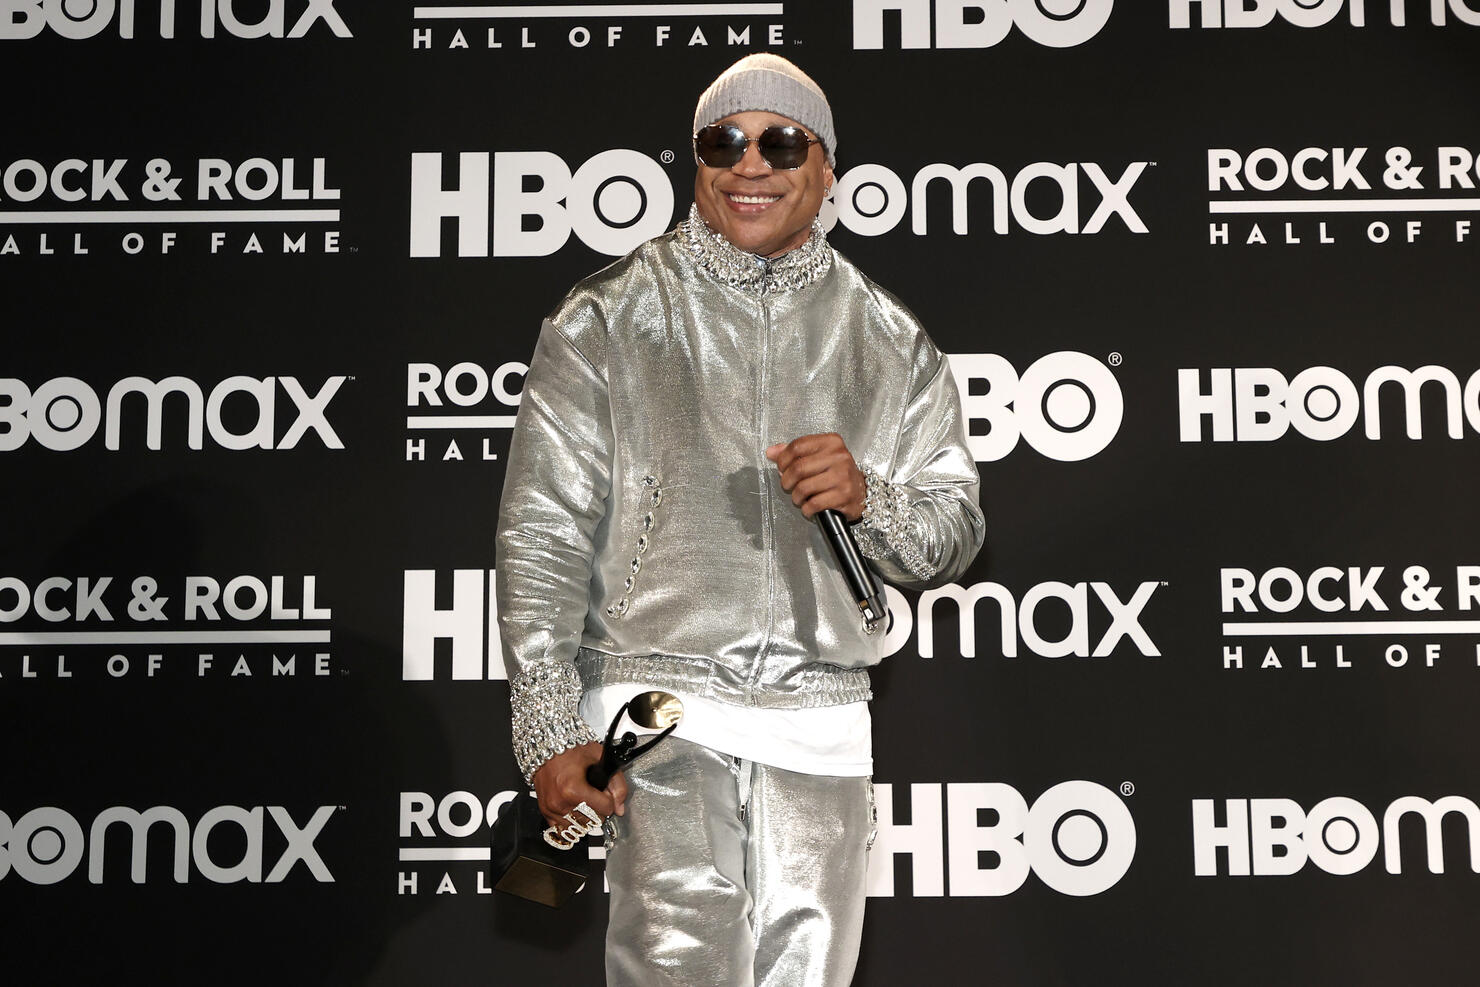 36th Annual Rock & Roll Hall Of Fame Induction Ceremony - Press Room